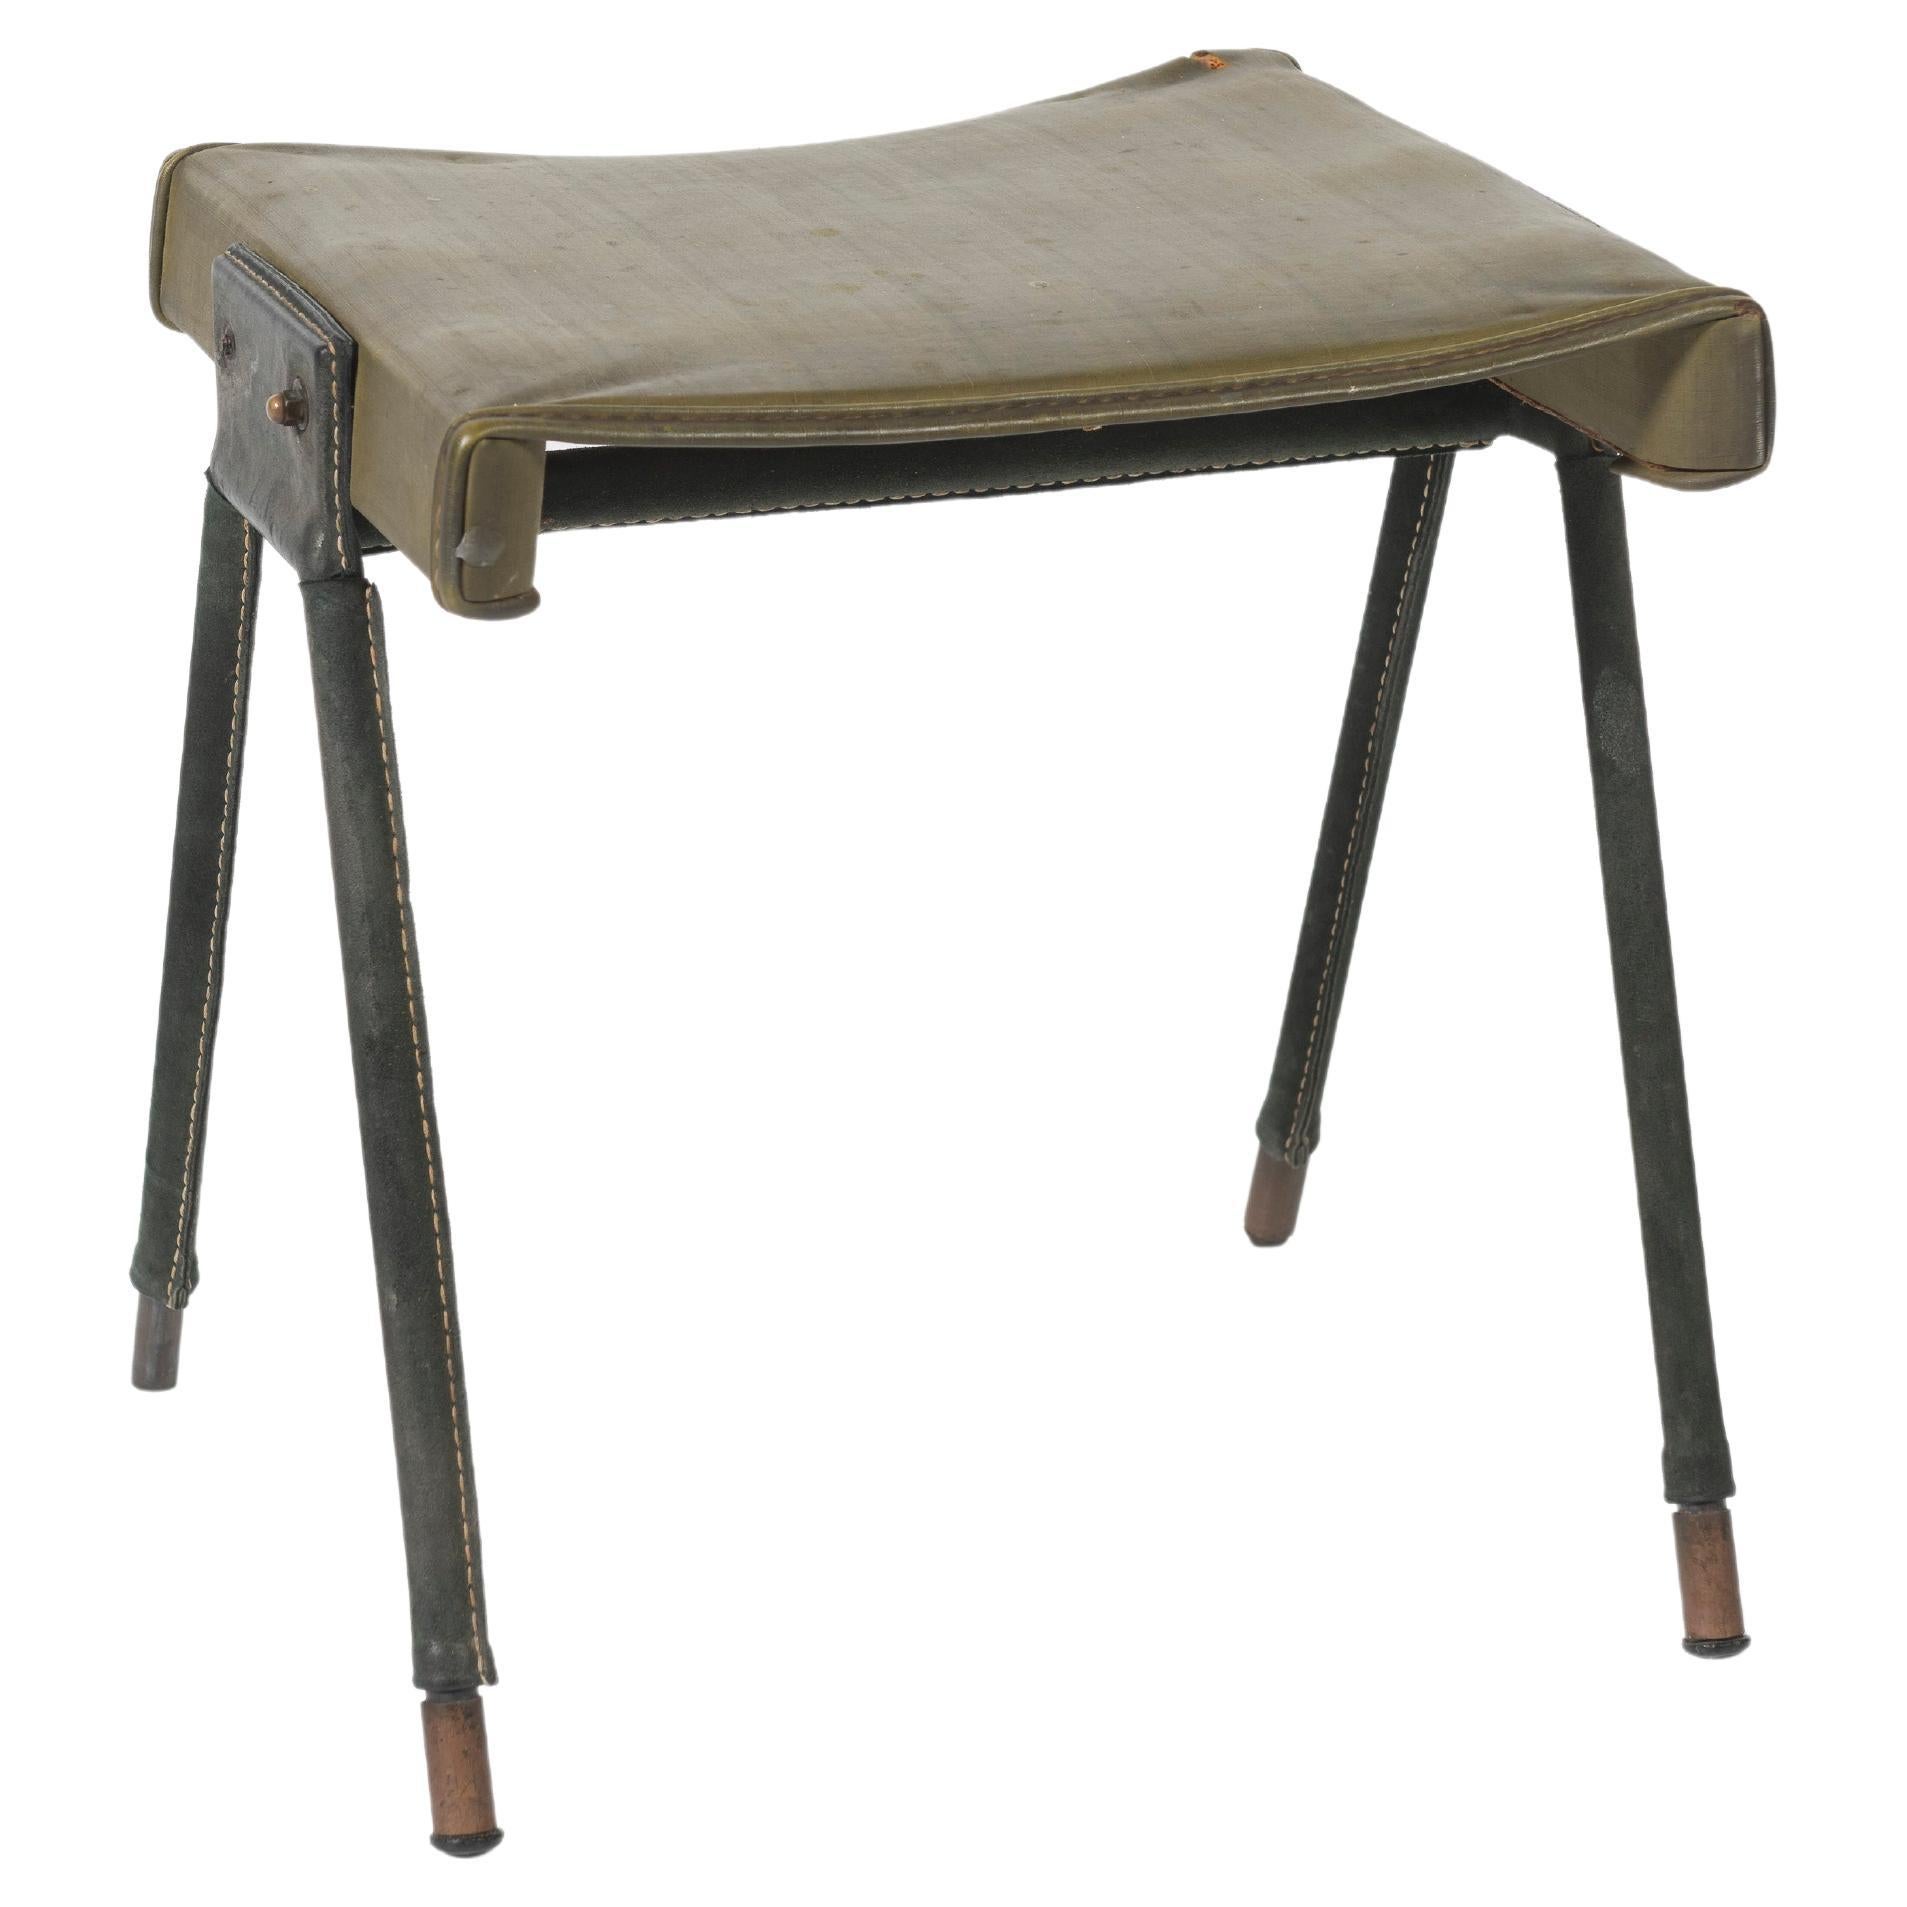 Jacques Adnet Stool Covered in Green Leather with Saddlestiching